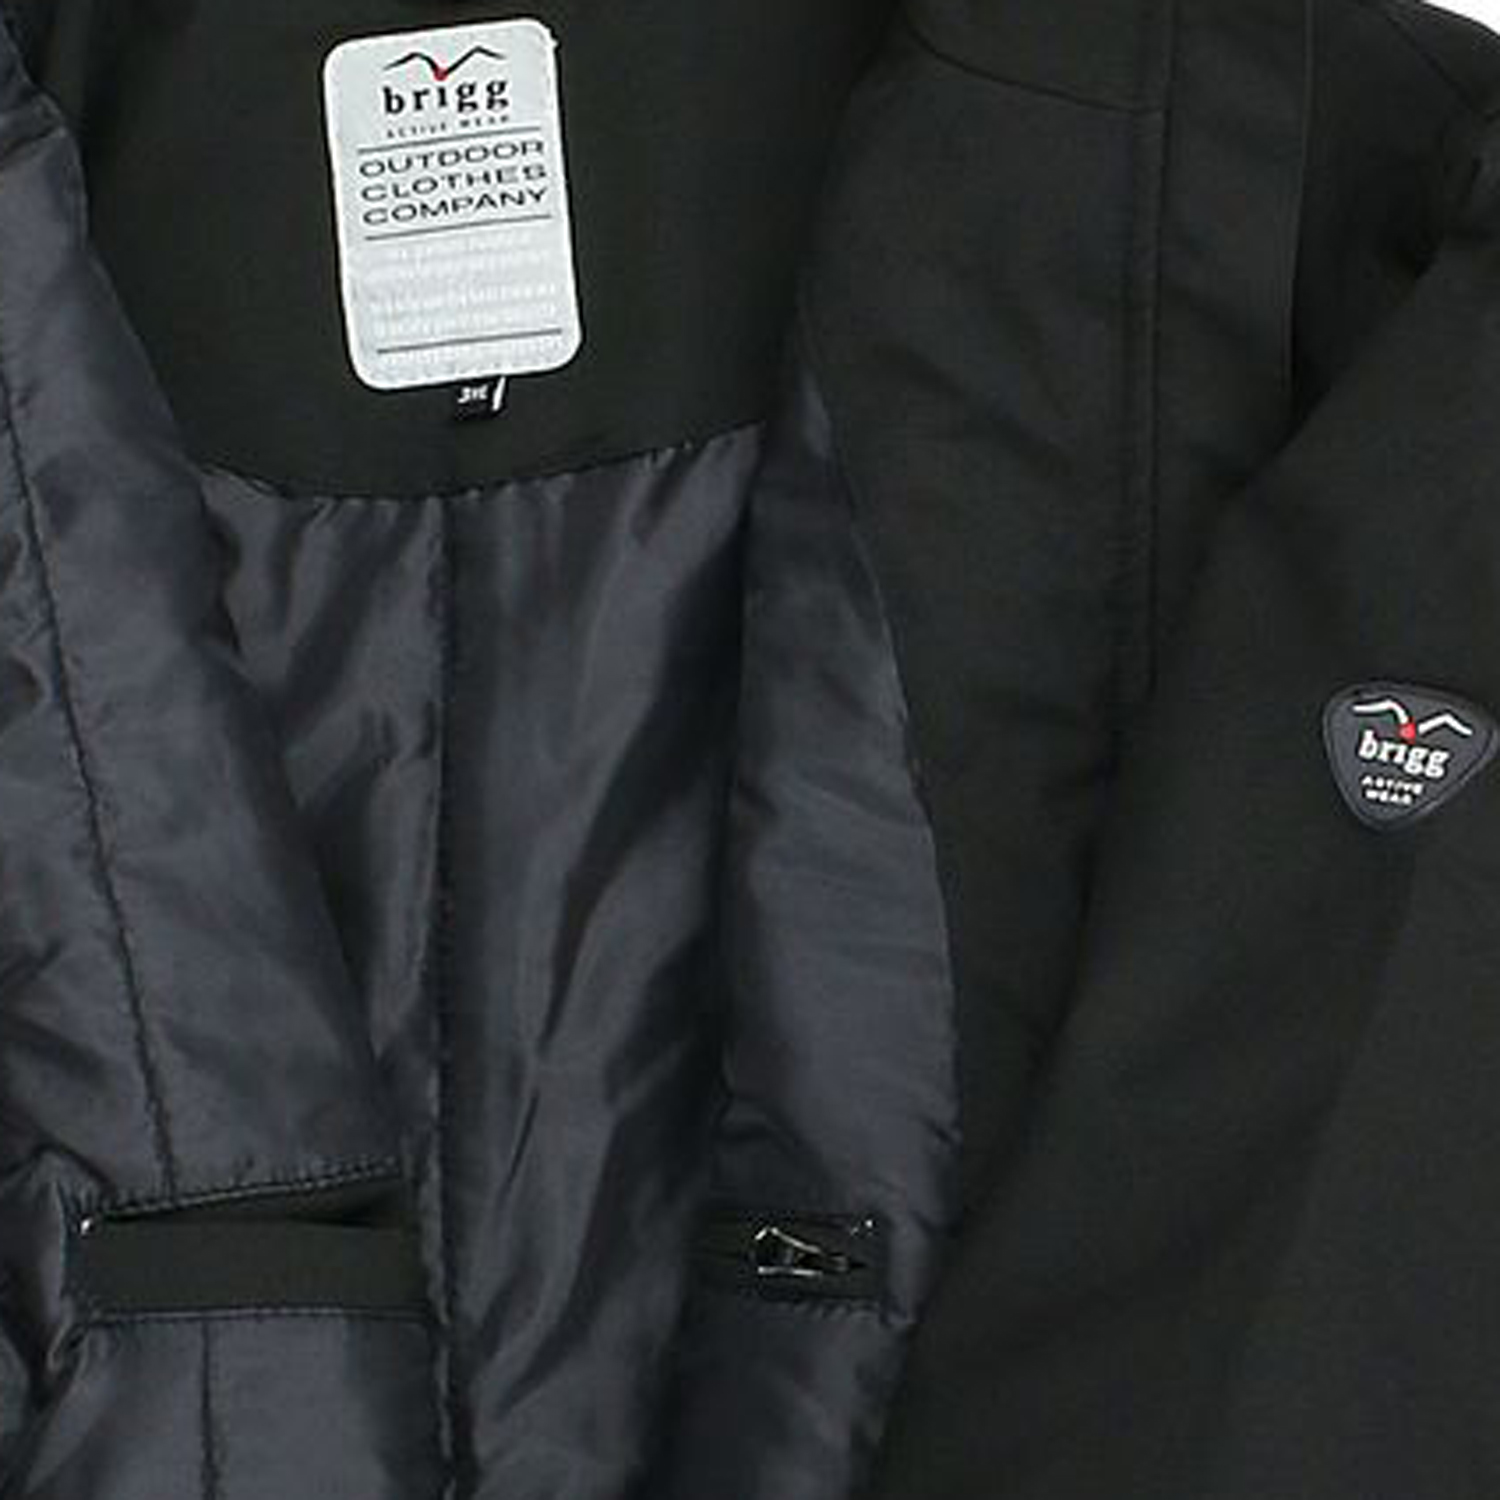 Lined softshell jacket in black by Brigg in oversizes up to 10XL